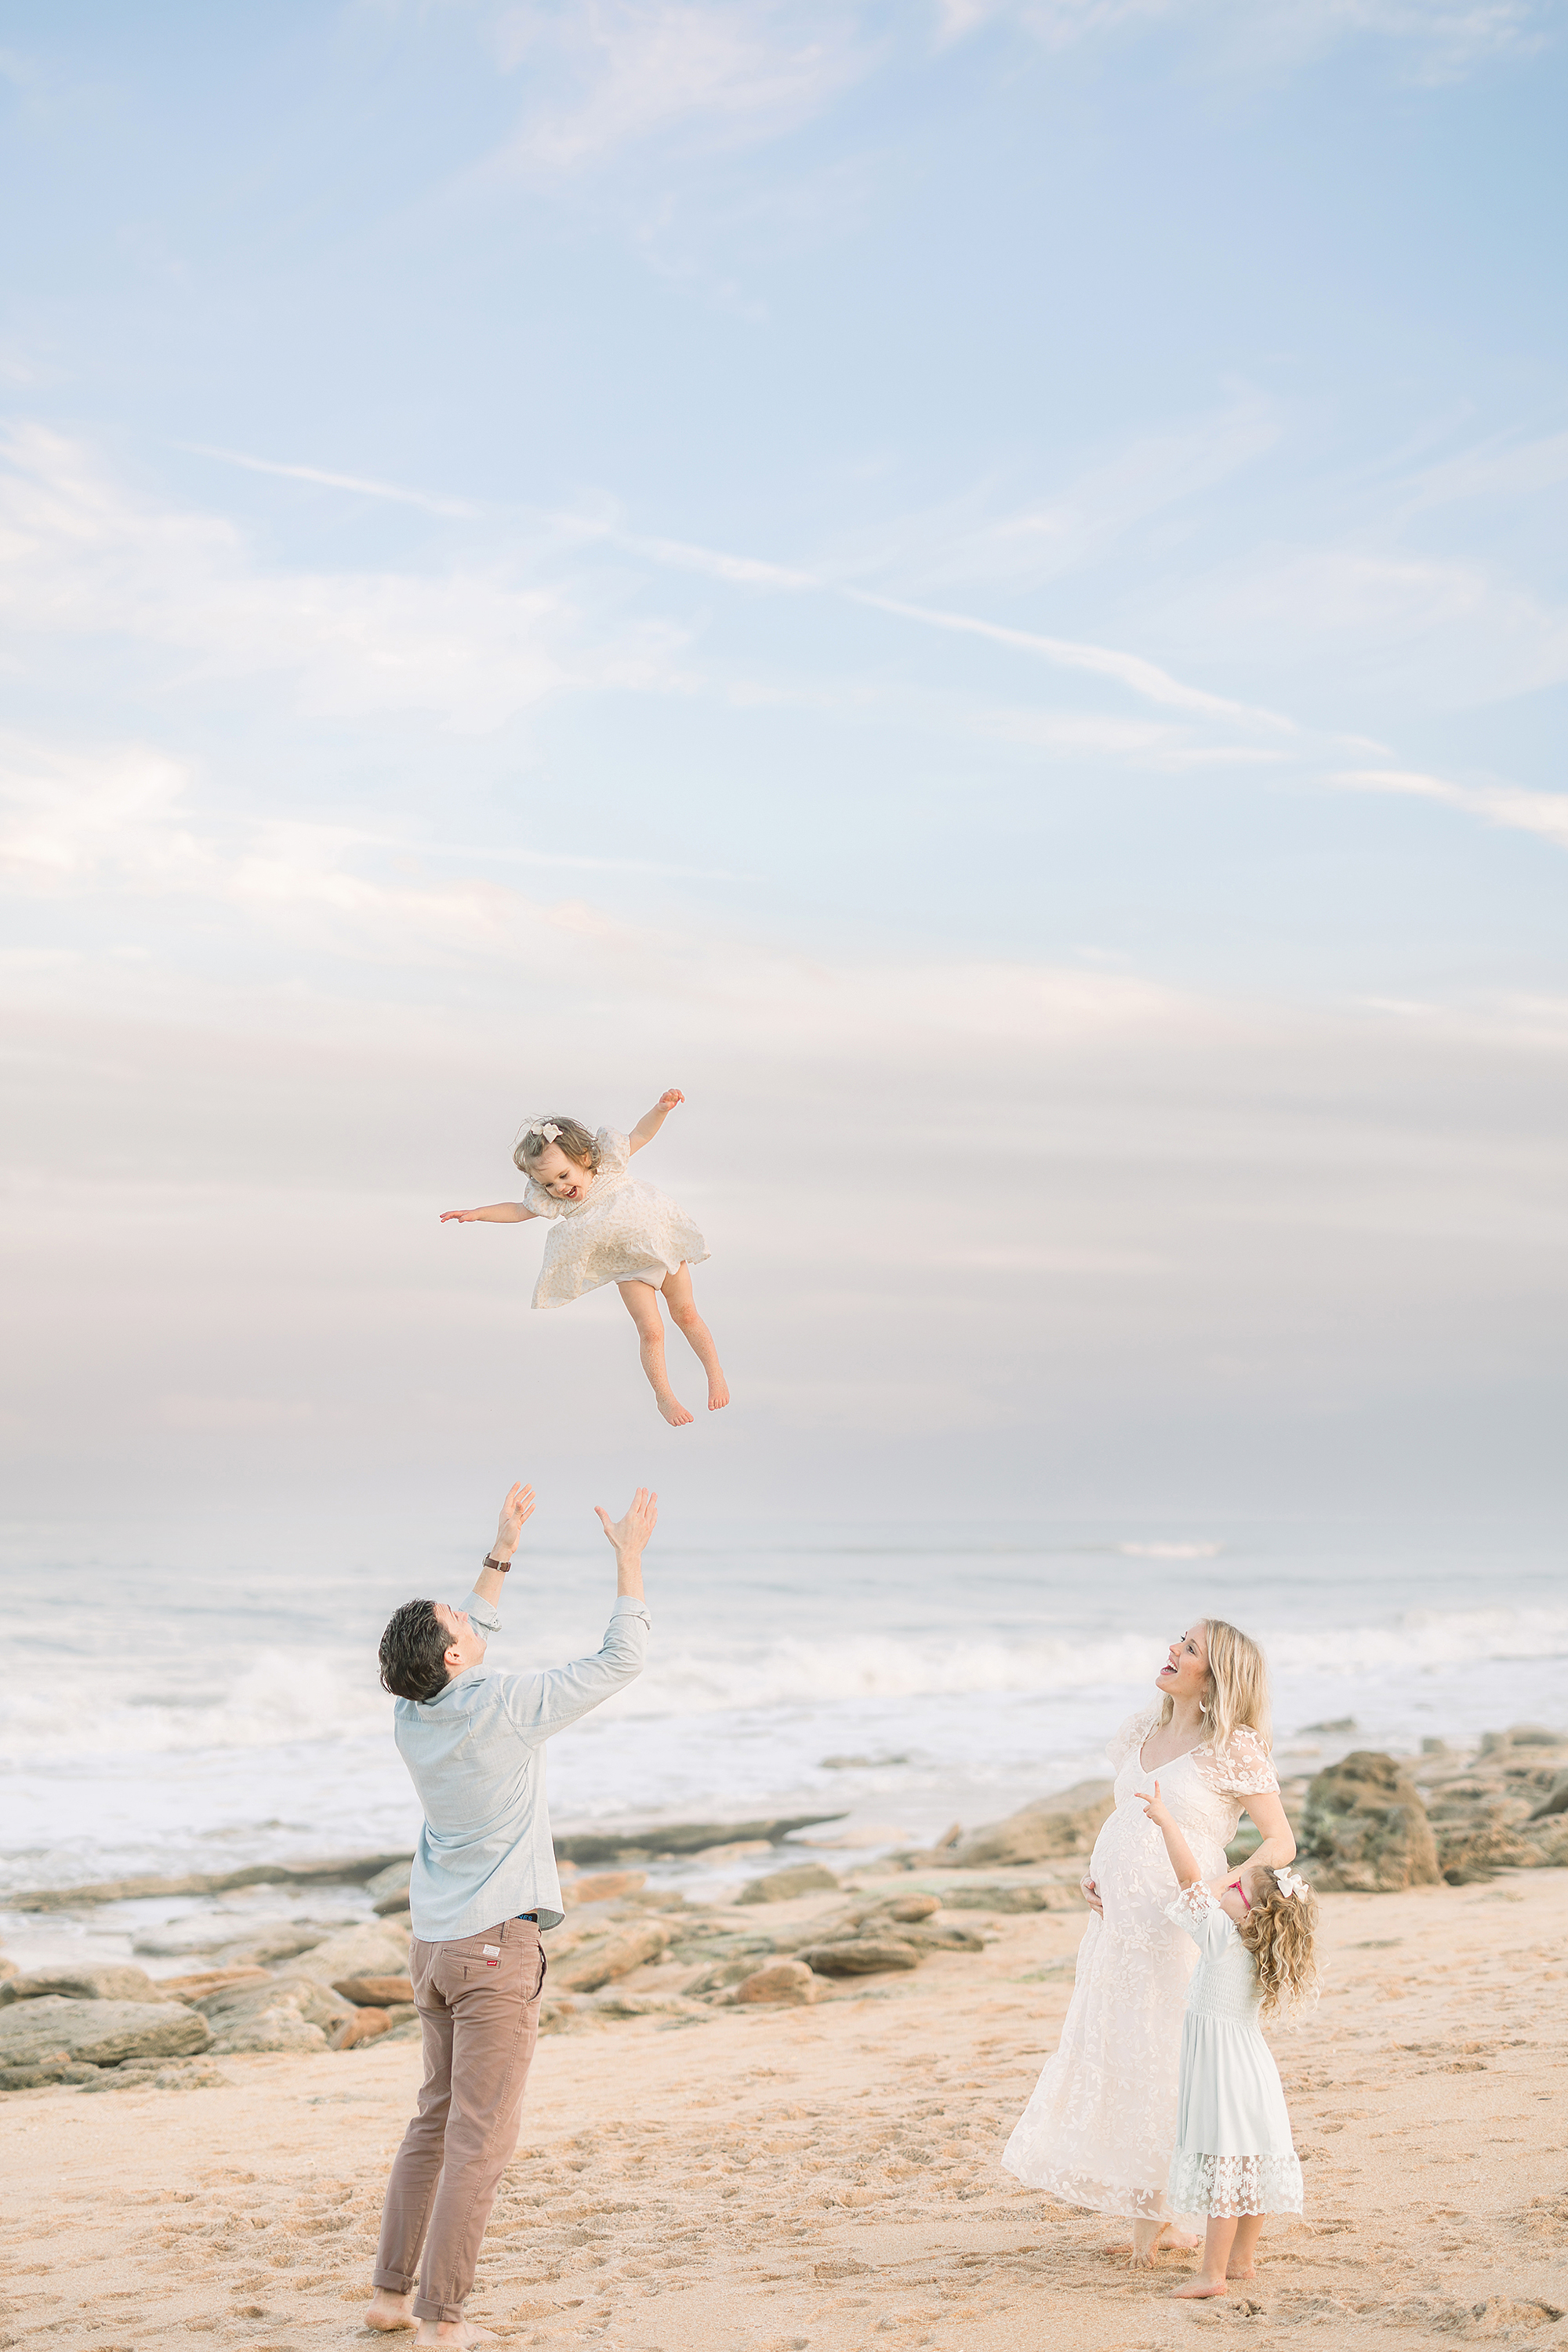 A family of four throwing a little girl up in the air on the beach at sunset.